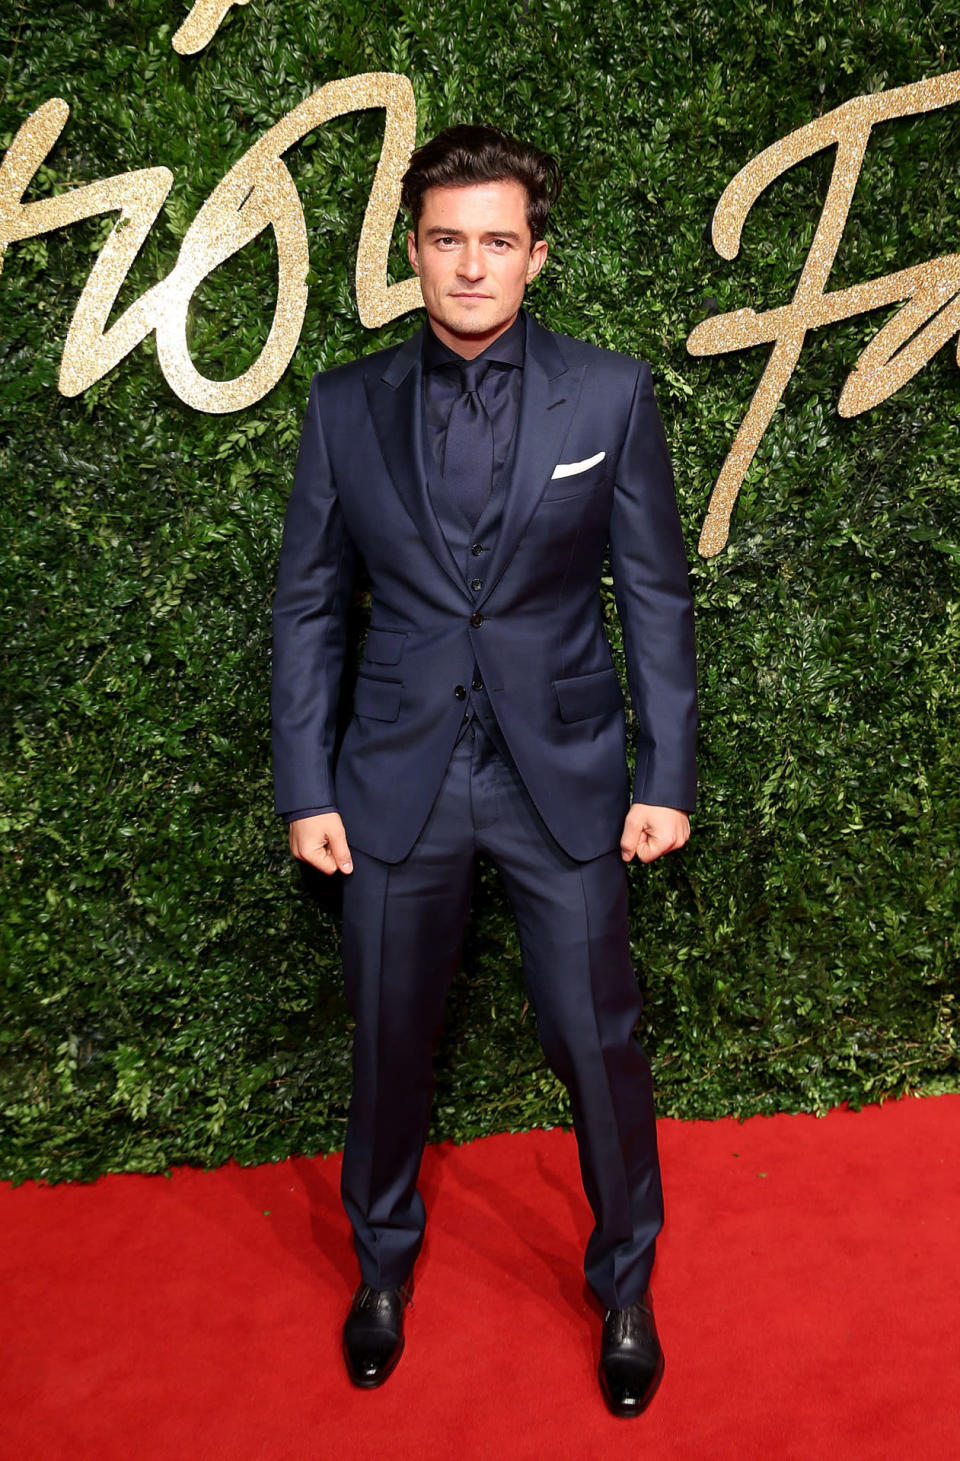 Orlando Bloom in a navy three-piece suit with matching shirt and tie.